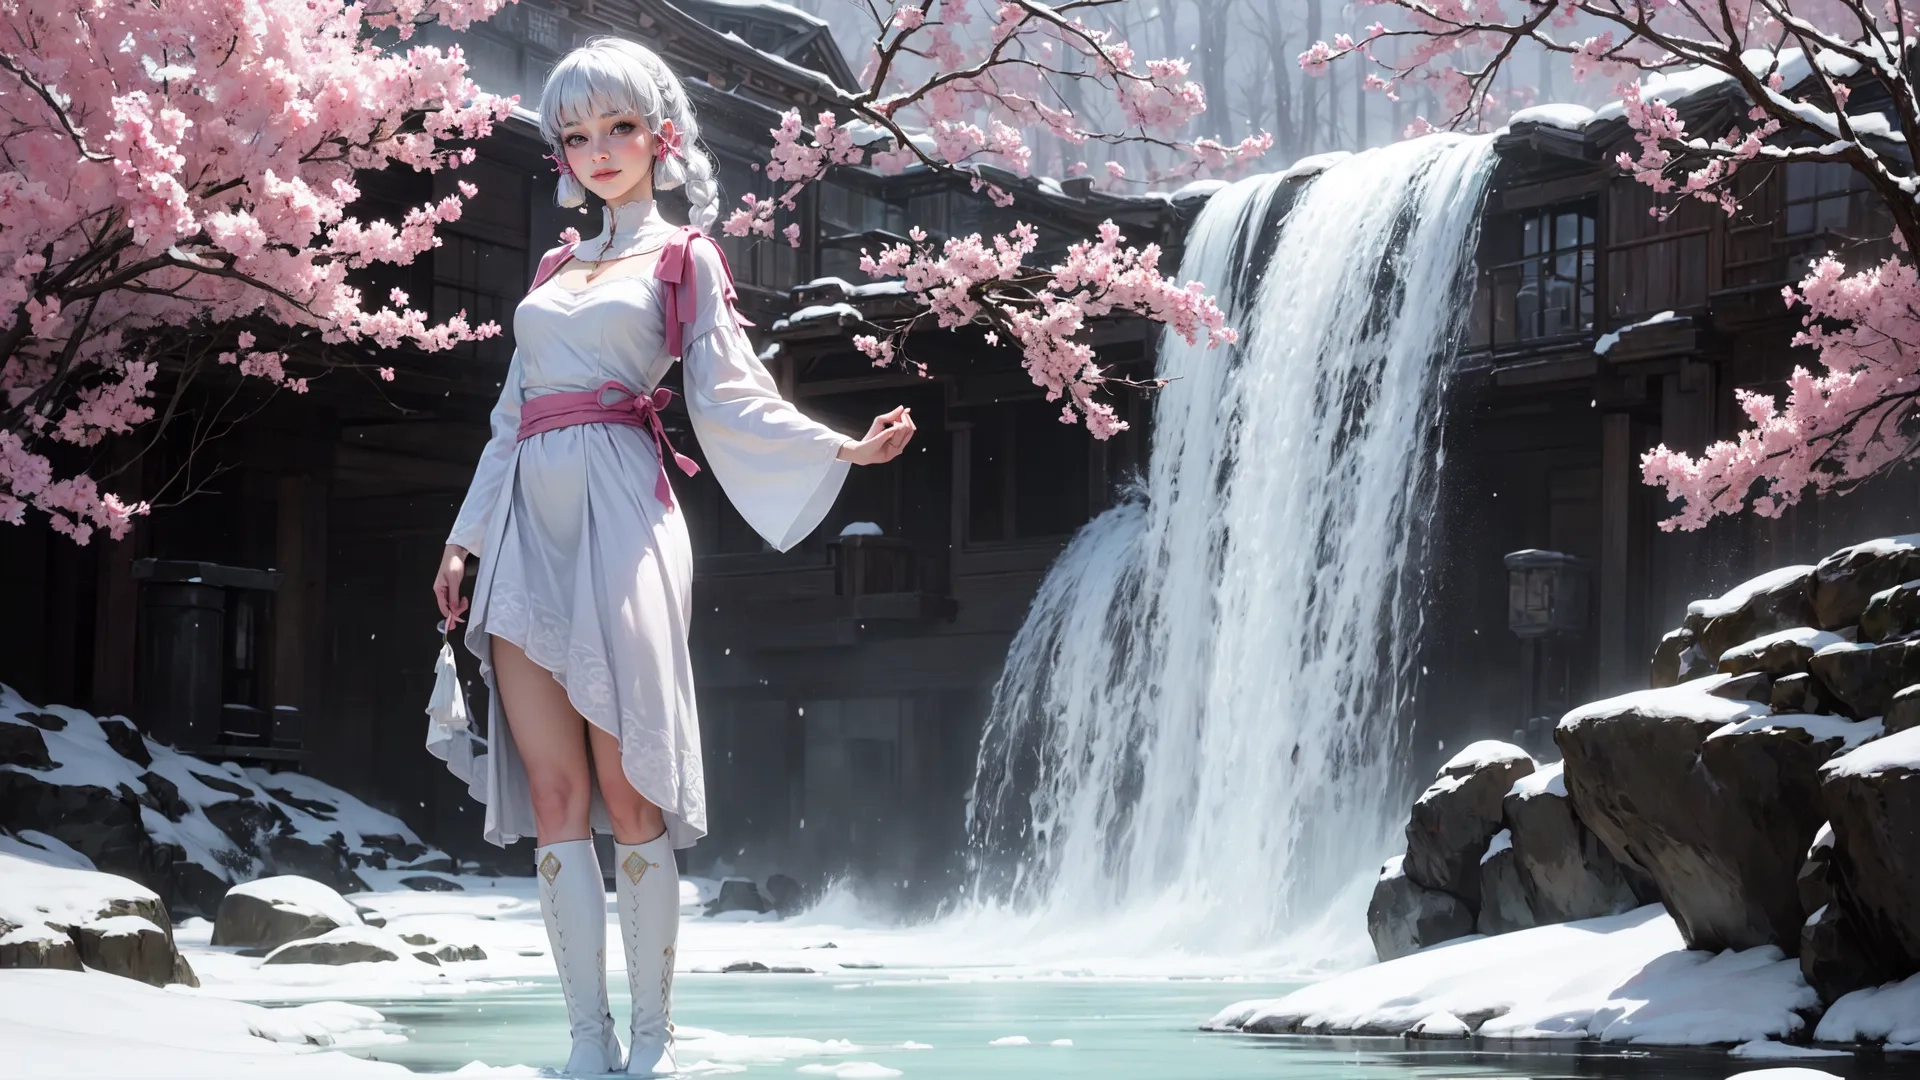 a woman standing next to a waterfall looking out at the sky in the springtime wearing white outfits by a red and pink flowered dress
